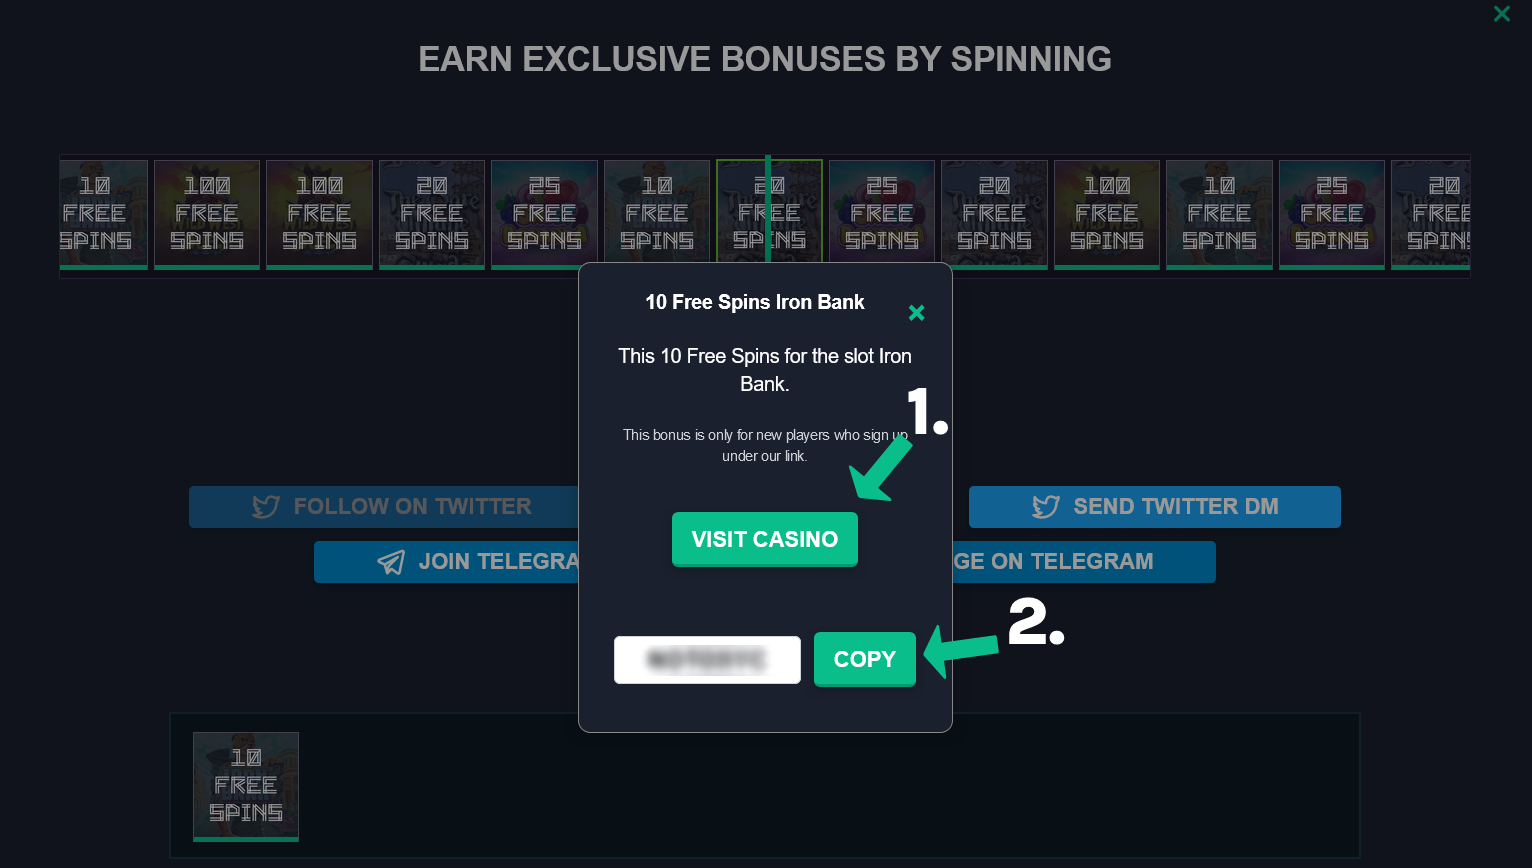 Register and submit the promo code for casino bonuses